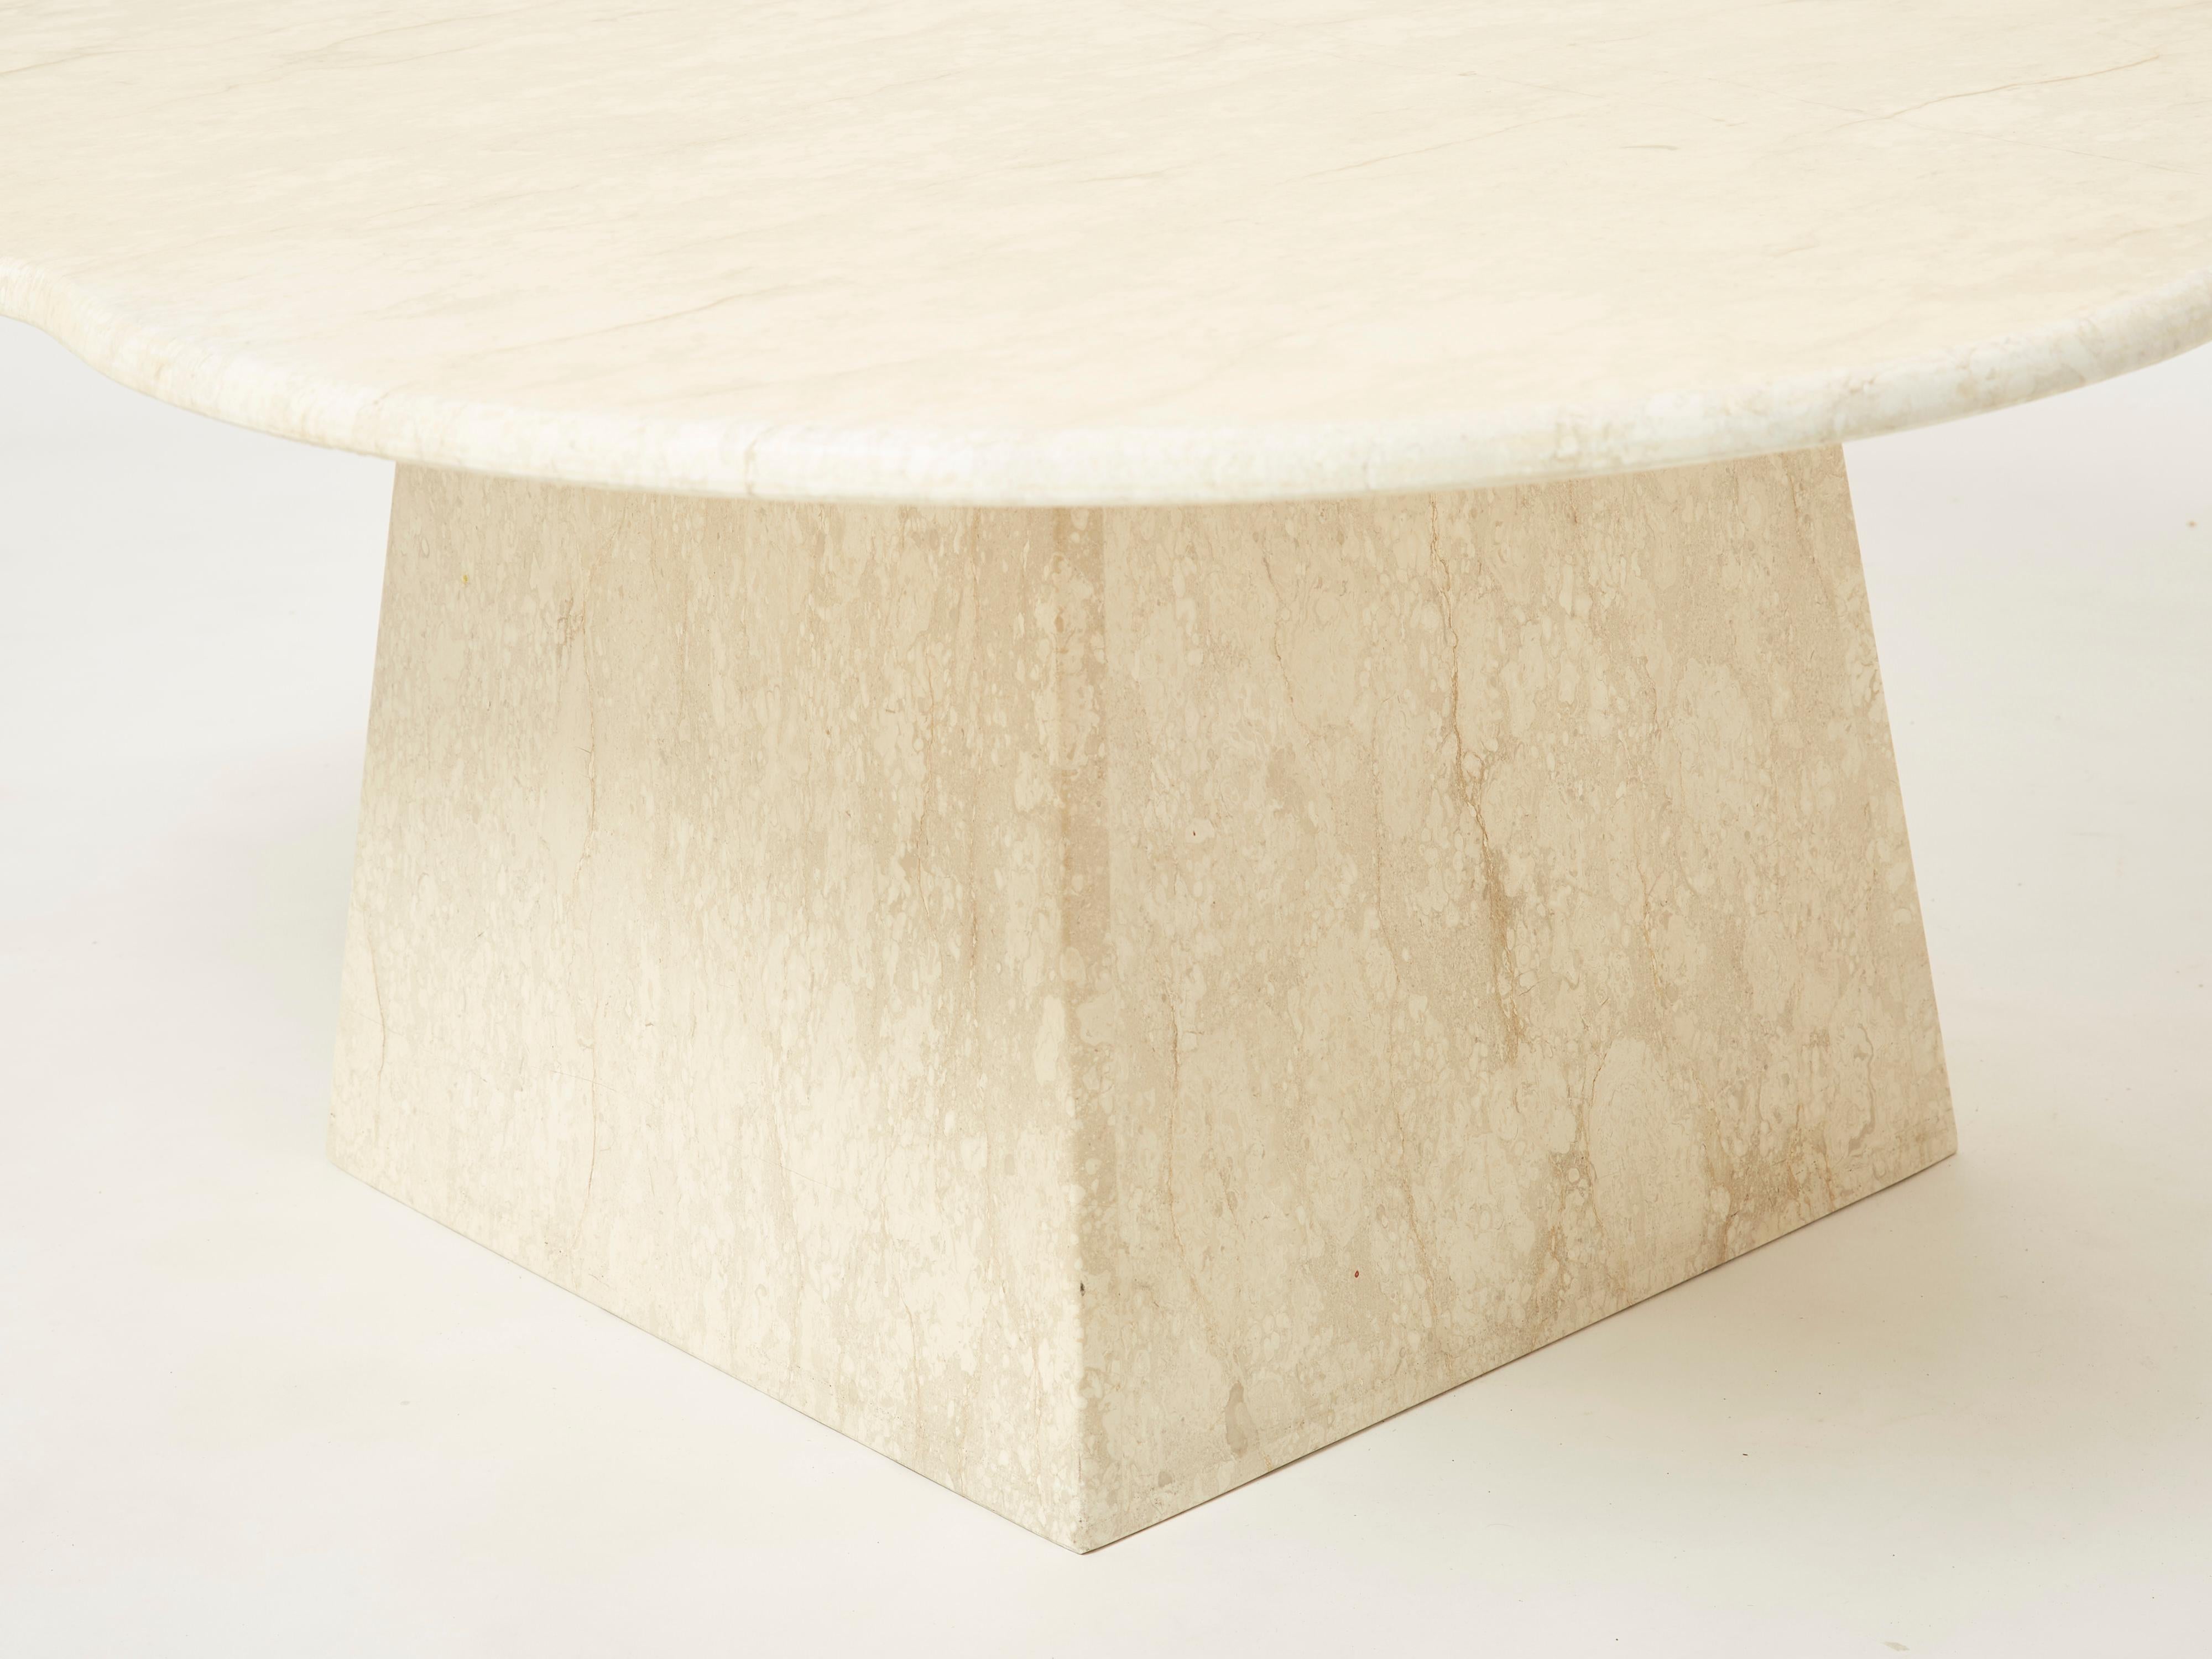 Large Clover Shaped Coffee Table Made of Italian Travertine 1970s 1